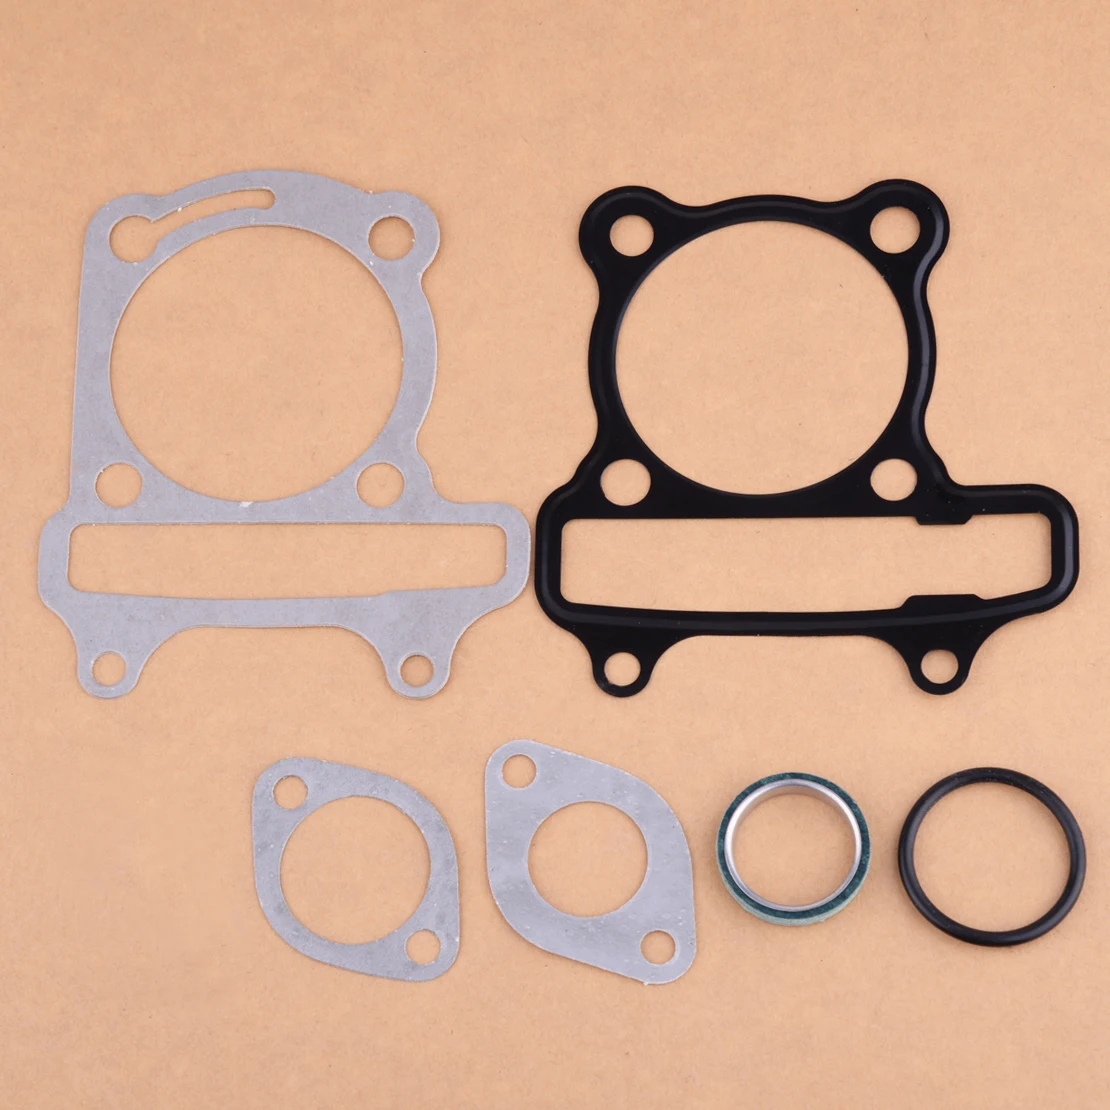 

CITALL Motorcycle 6pcs Gasket Set Replacement Fit for Chinese GY6 Go-kart ATV Scooter Moped with 150cc 57.5-58.5 mm Cylinder